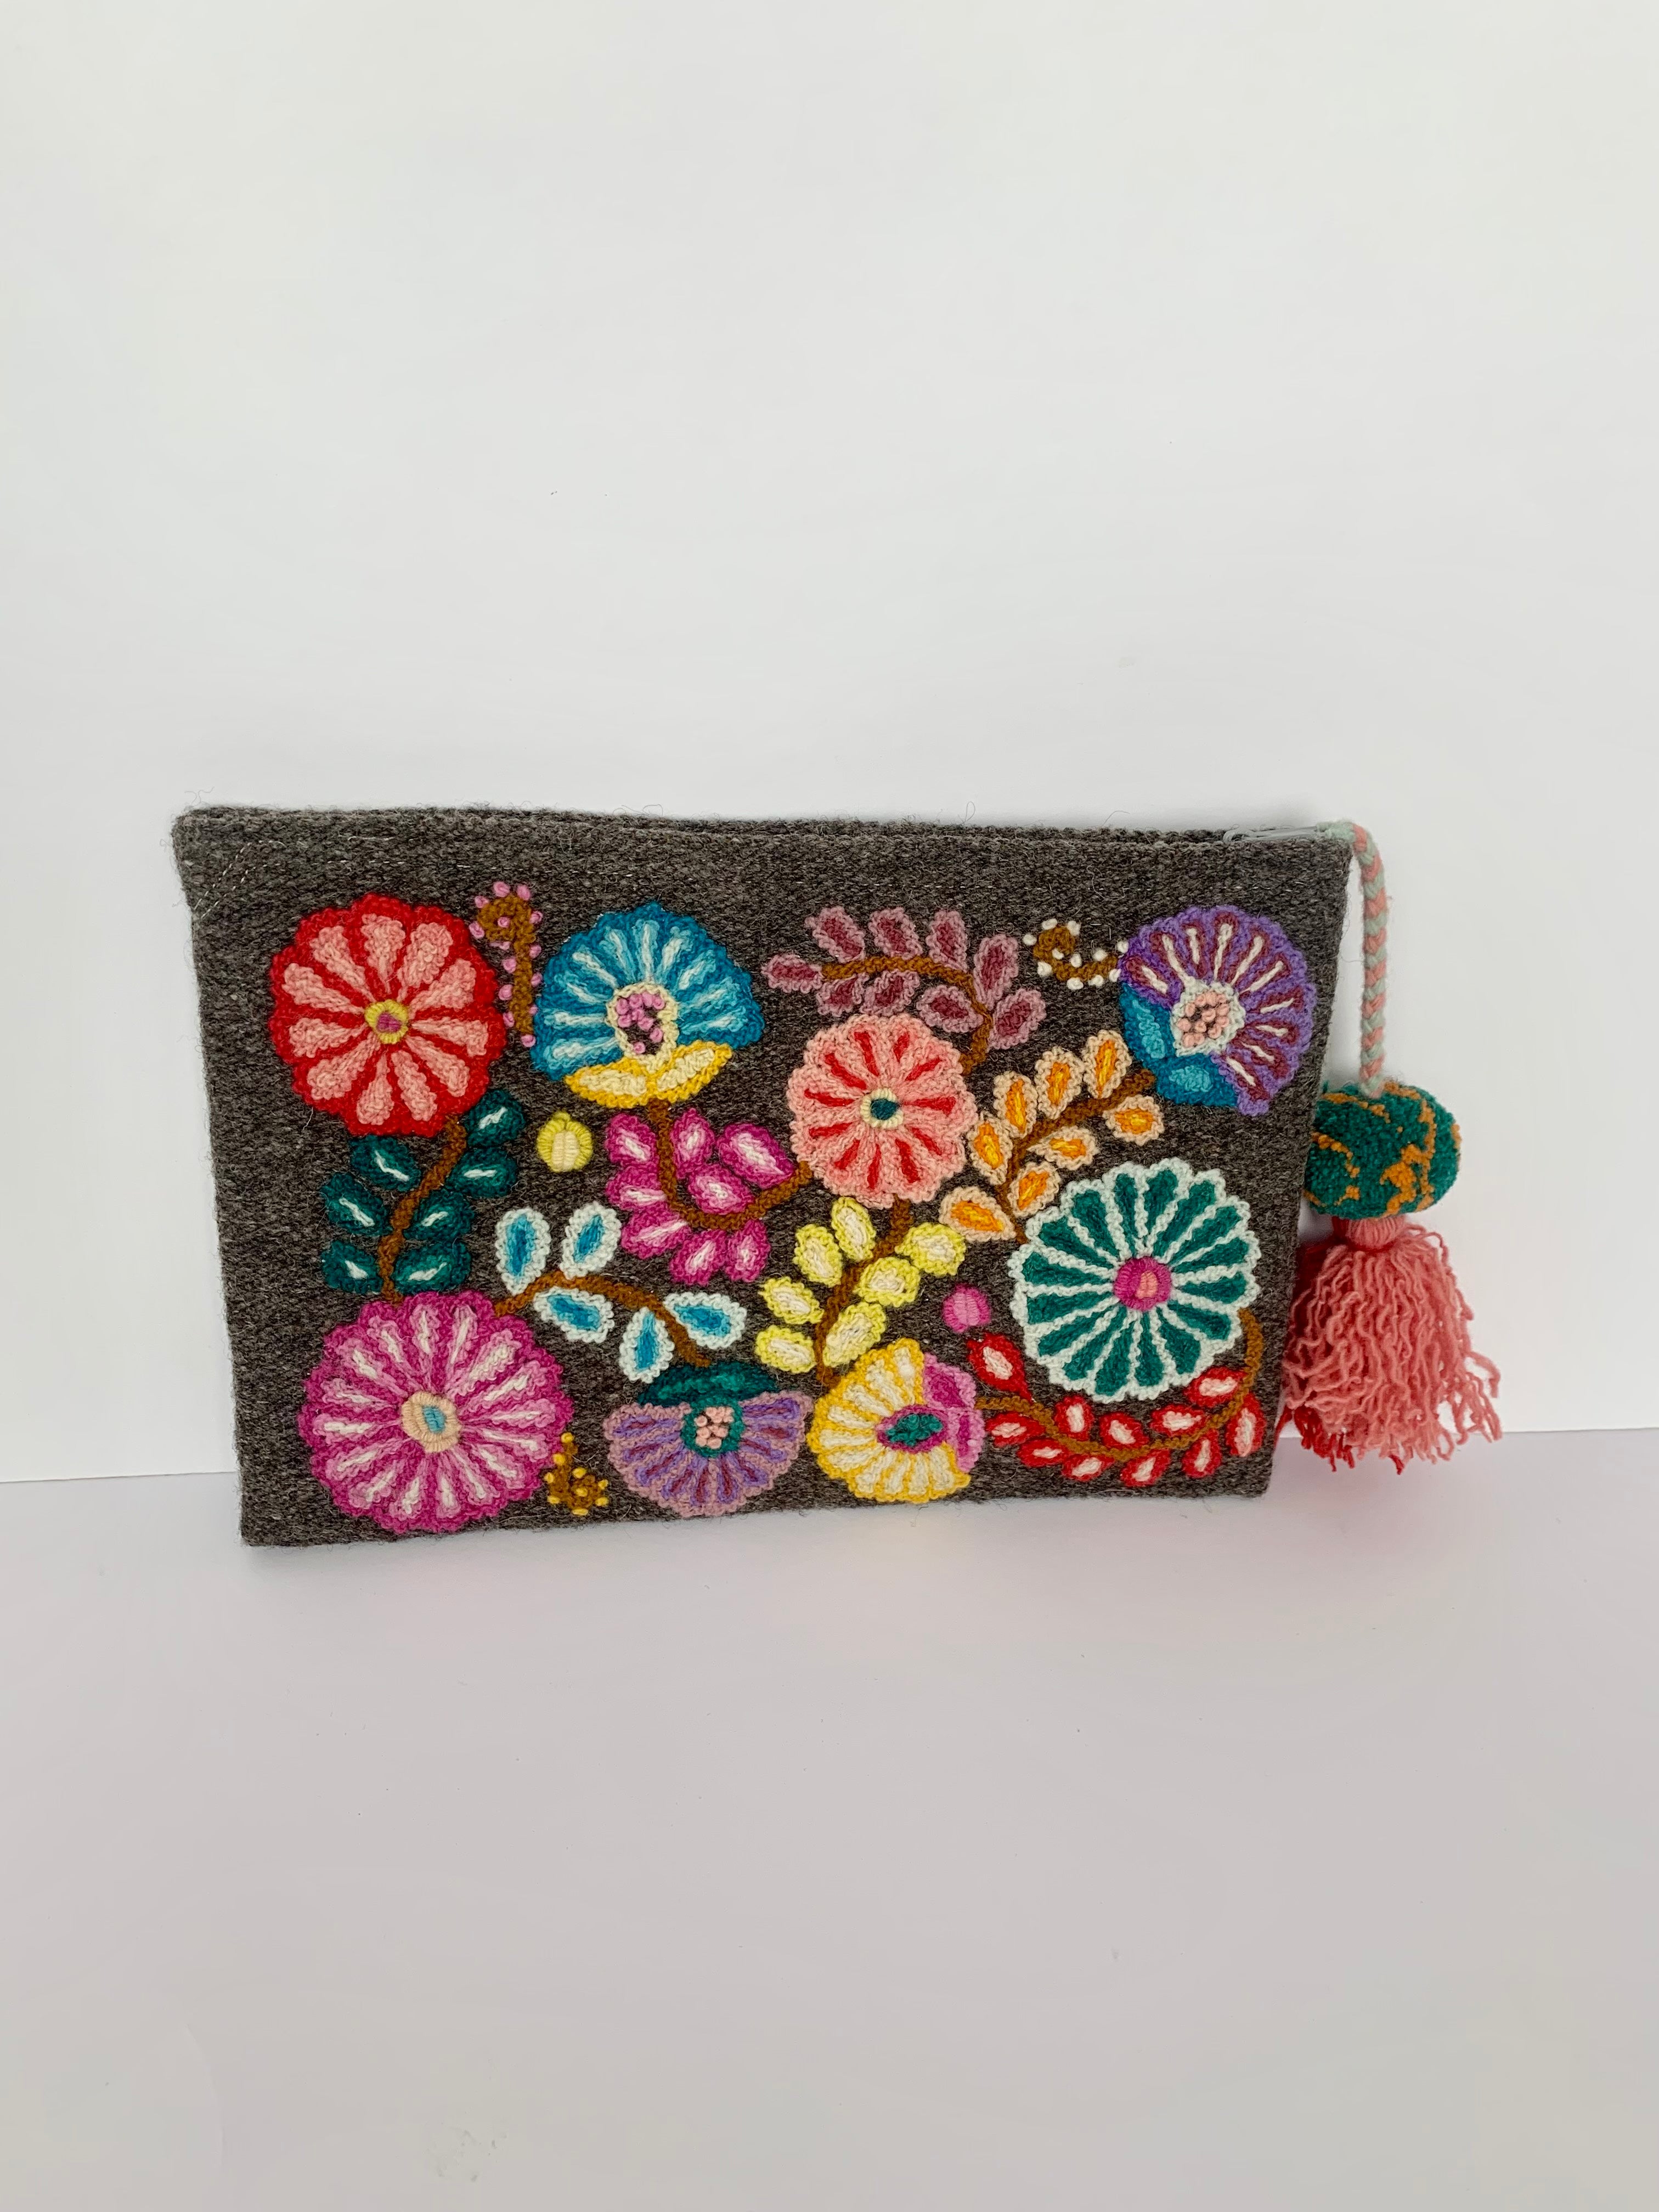 Bright Embroidered Clutch with floral design, tassel zipper, and gray cotton lining. 